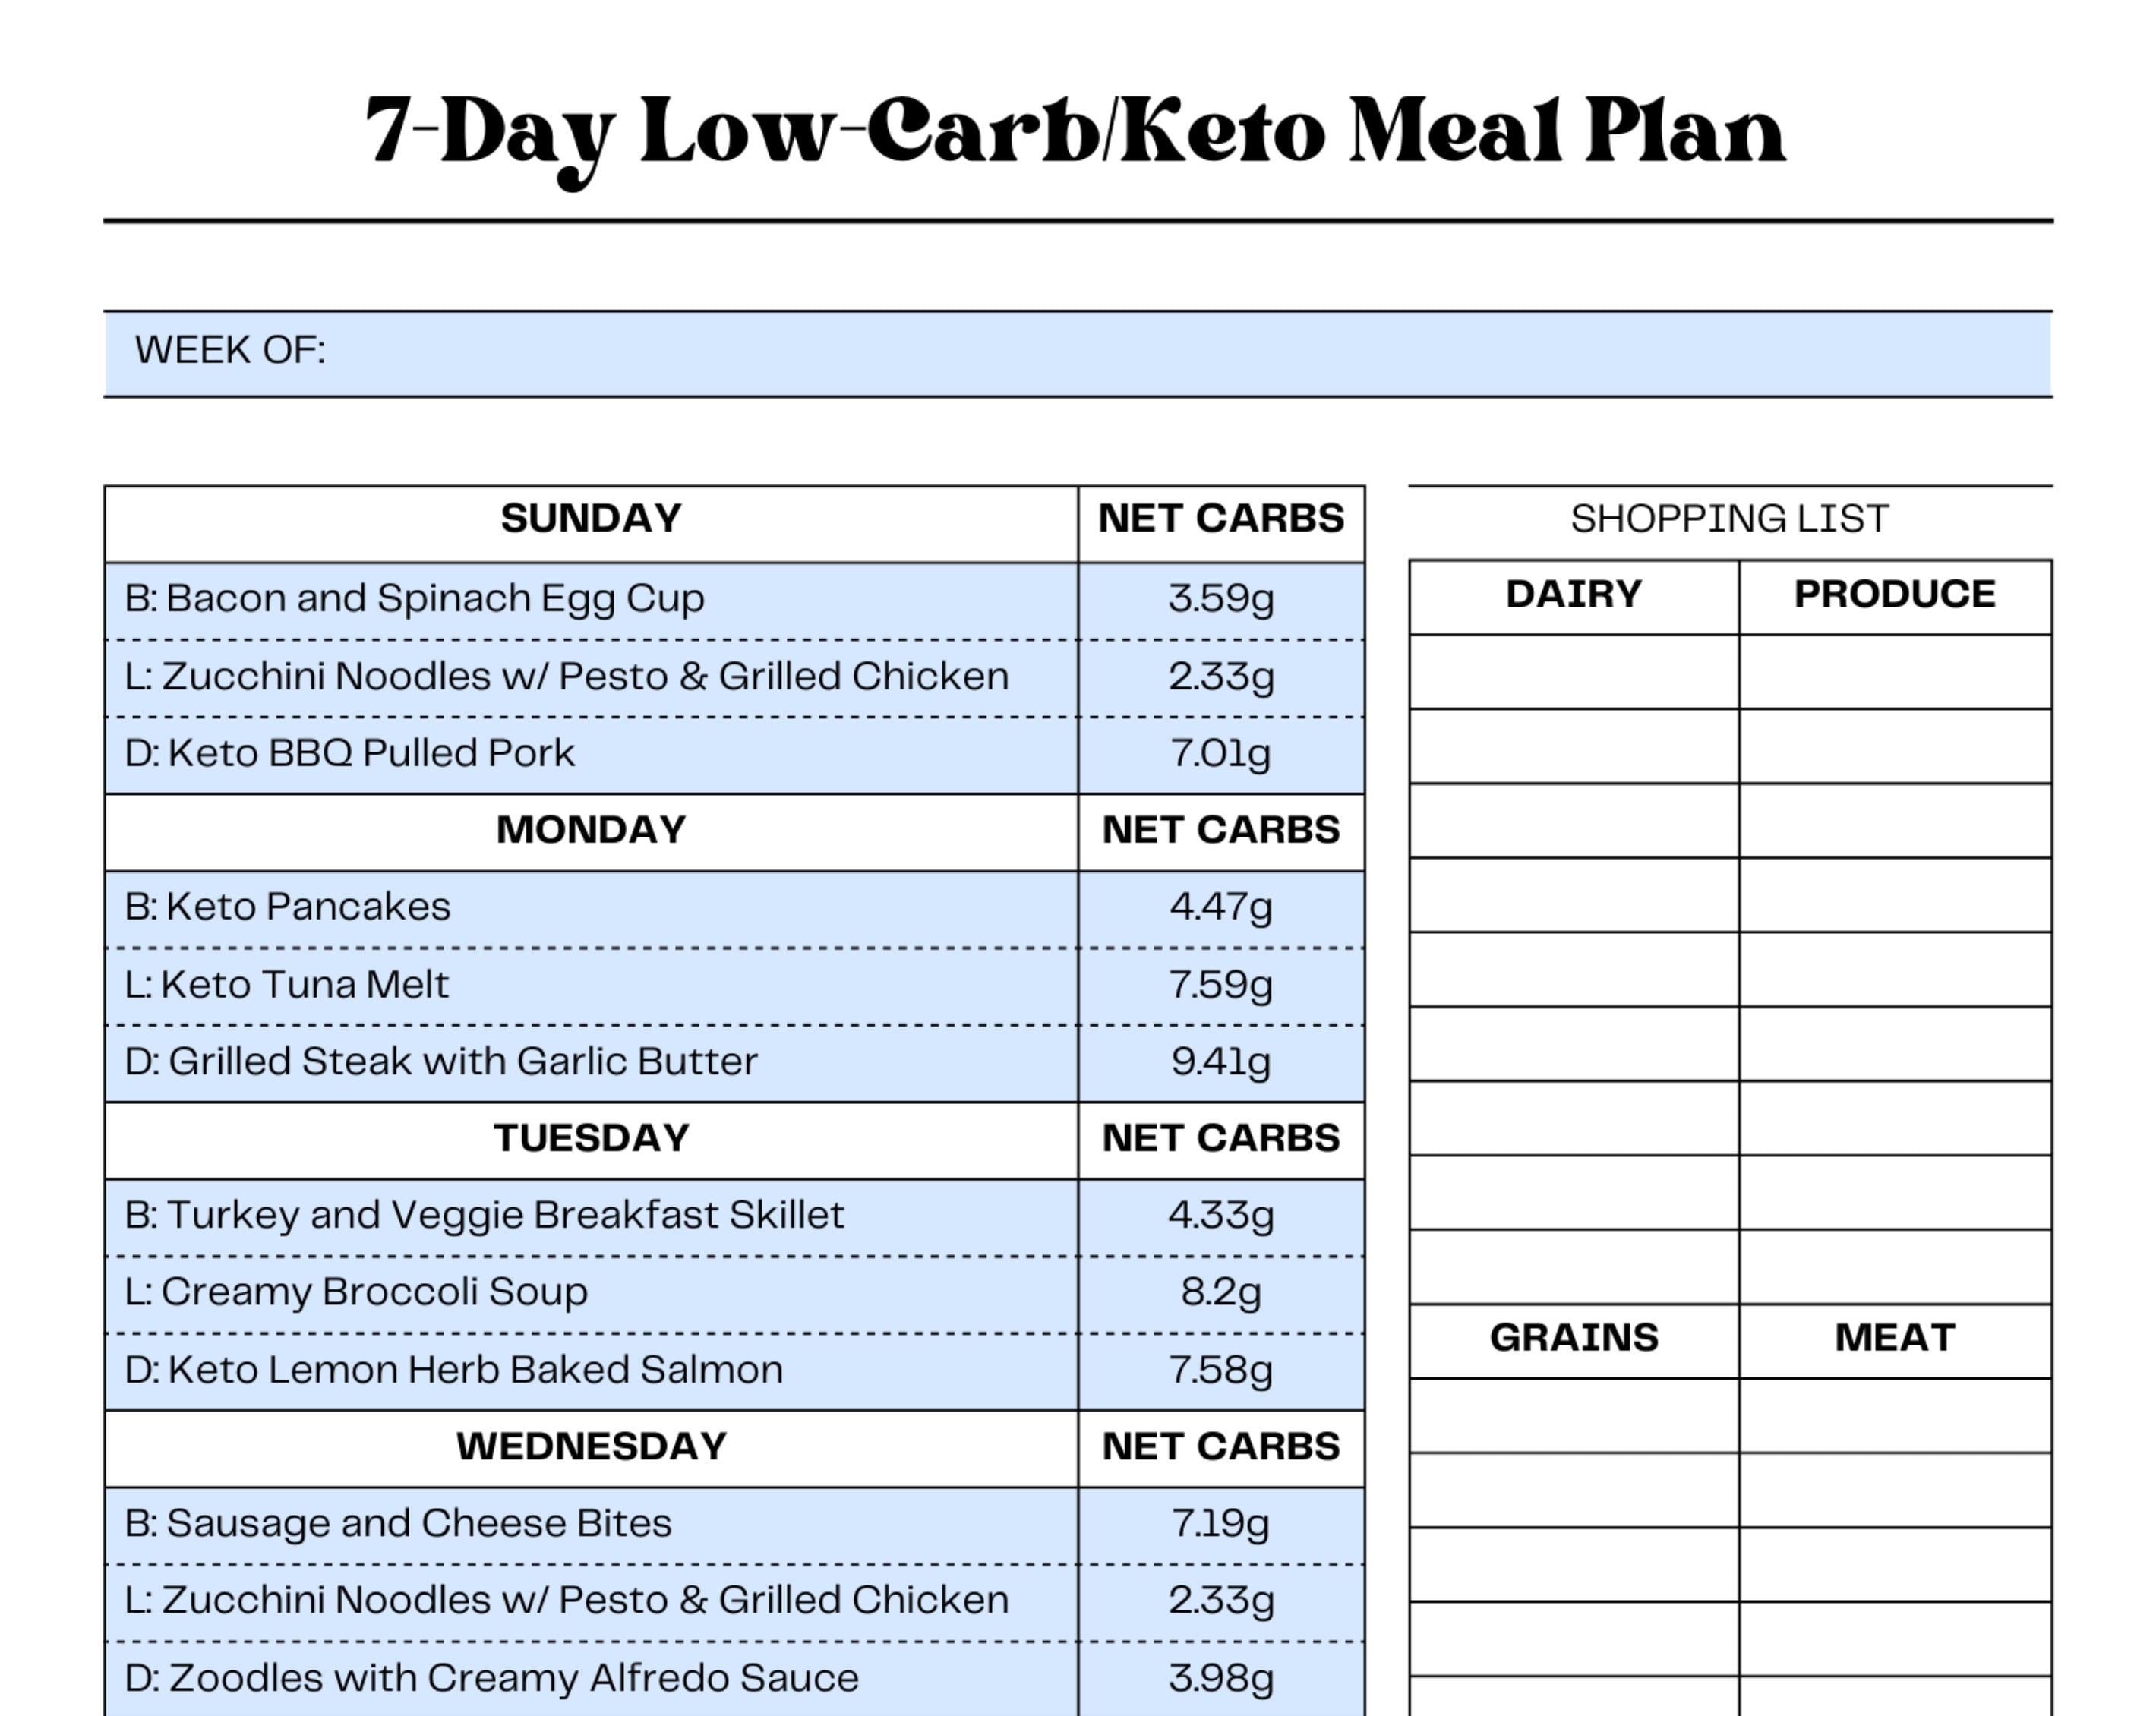 7 Day Easy Moderate Keto Meal Plan Low Carb Recipes With Grams of Carbs ...